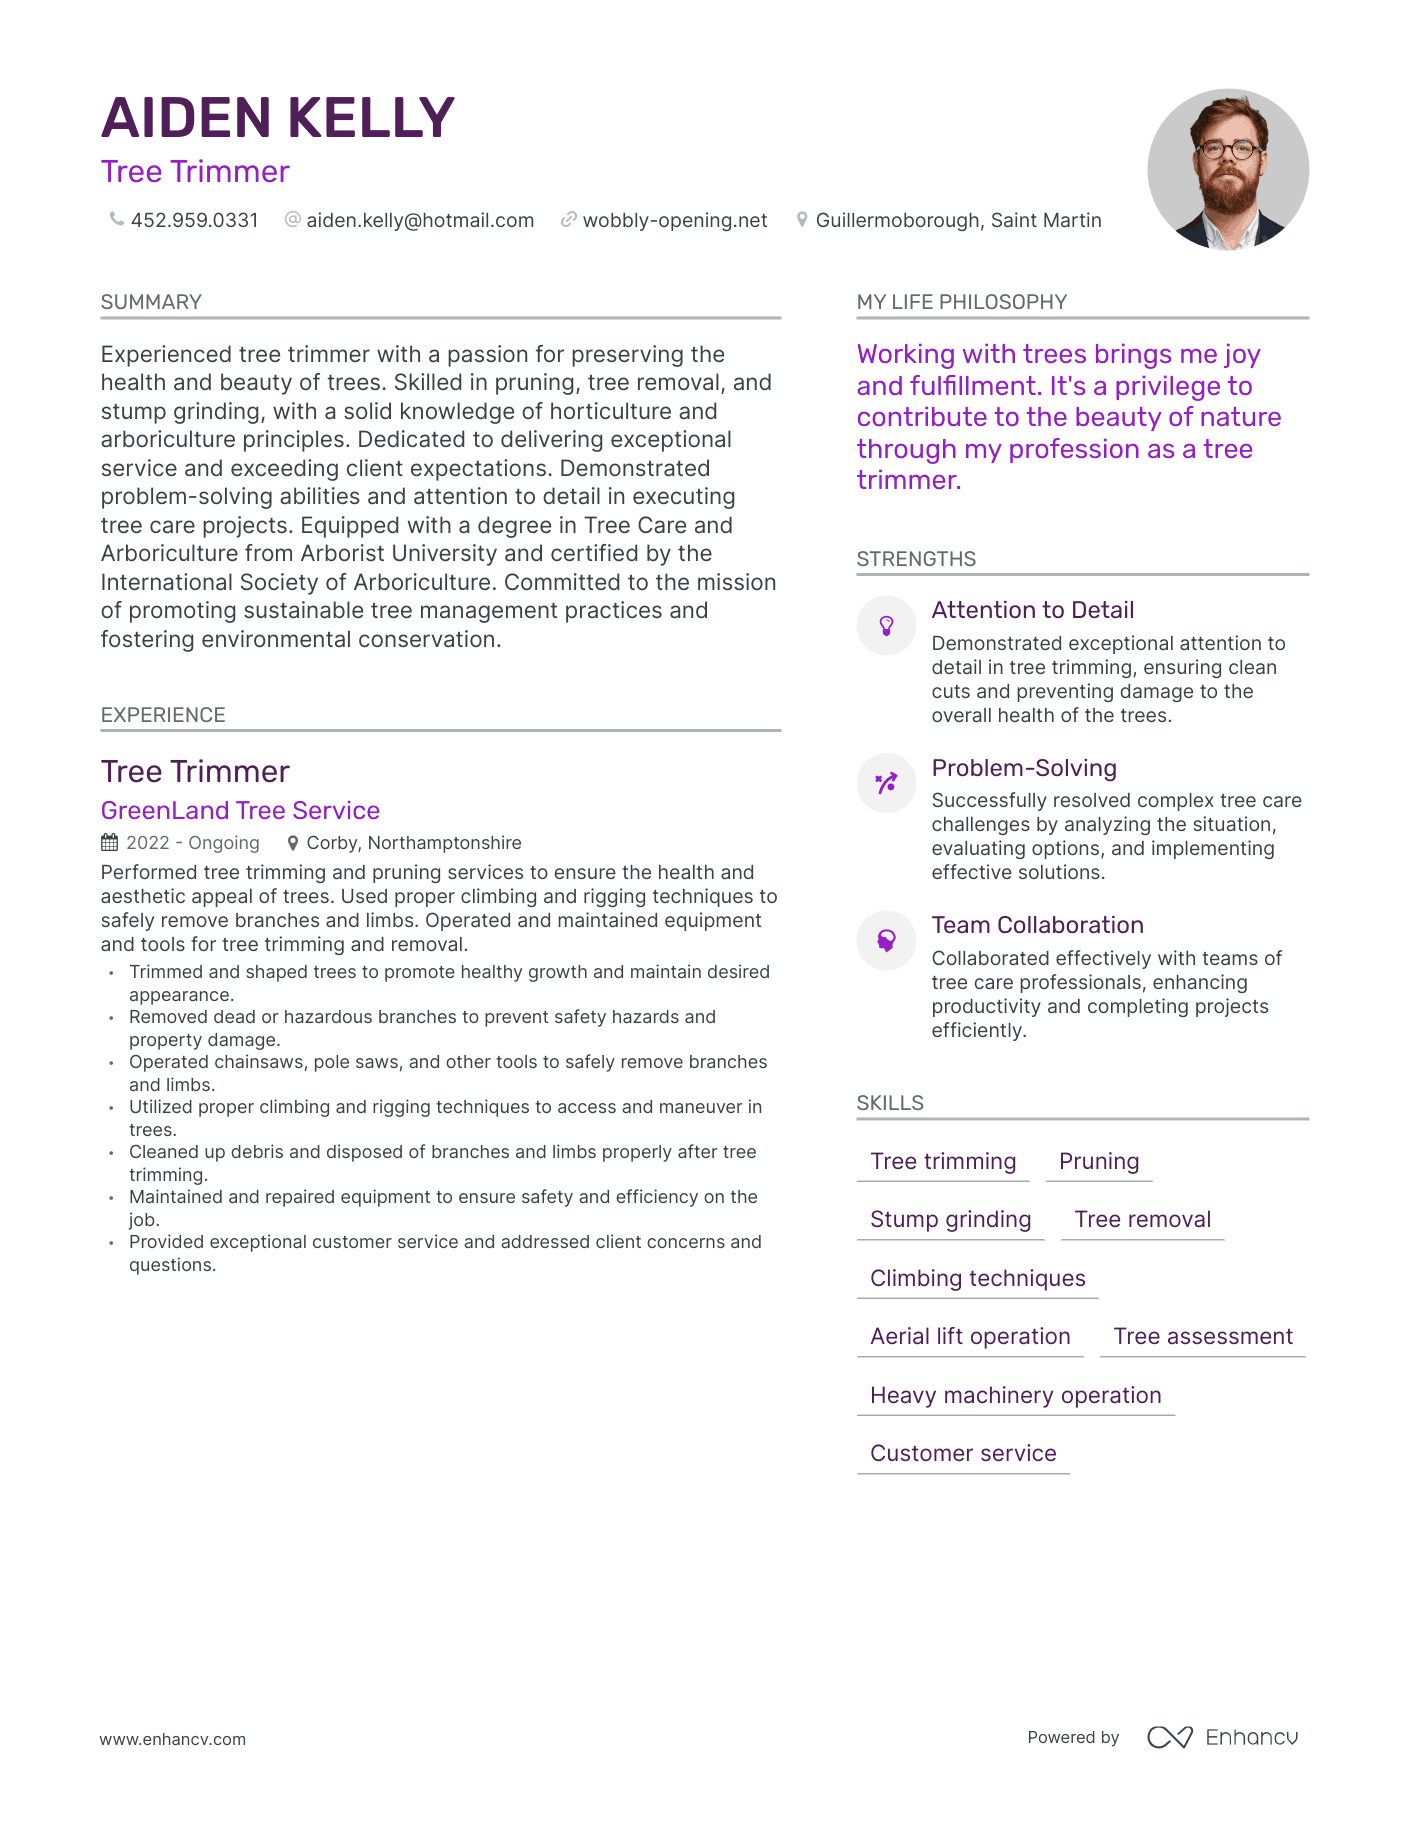 Tree Trimmer resume example